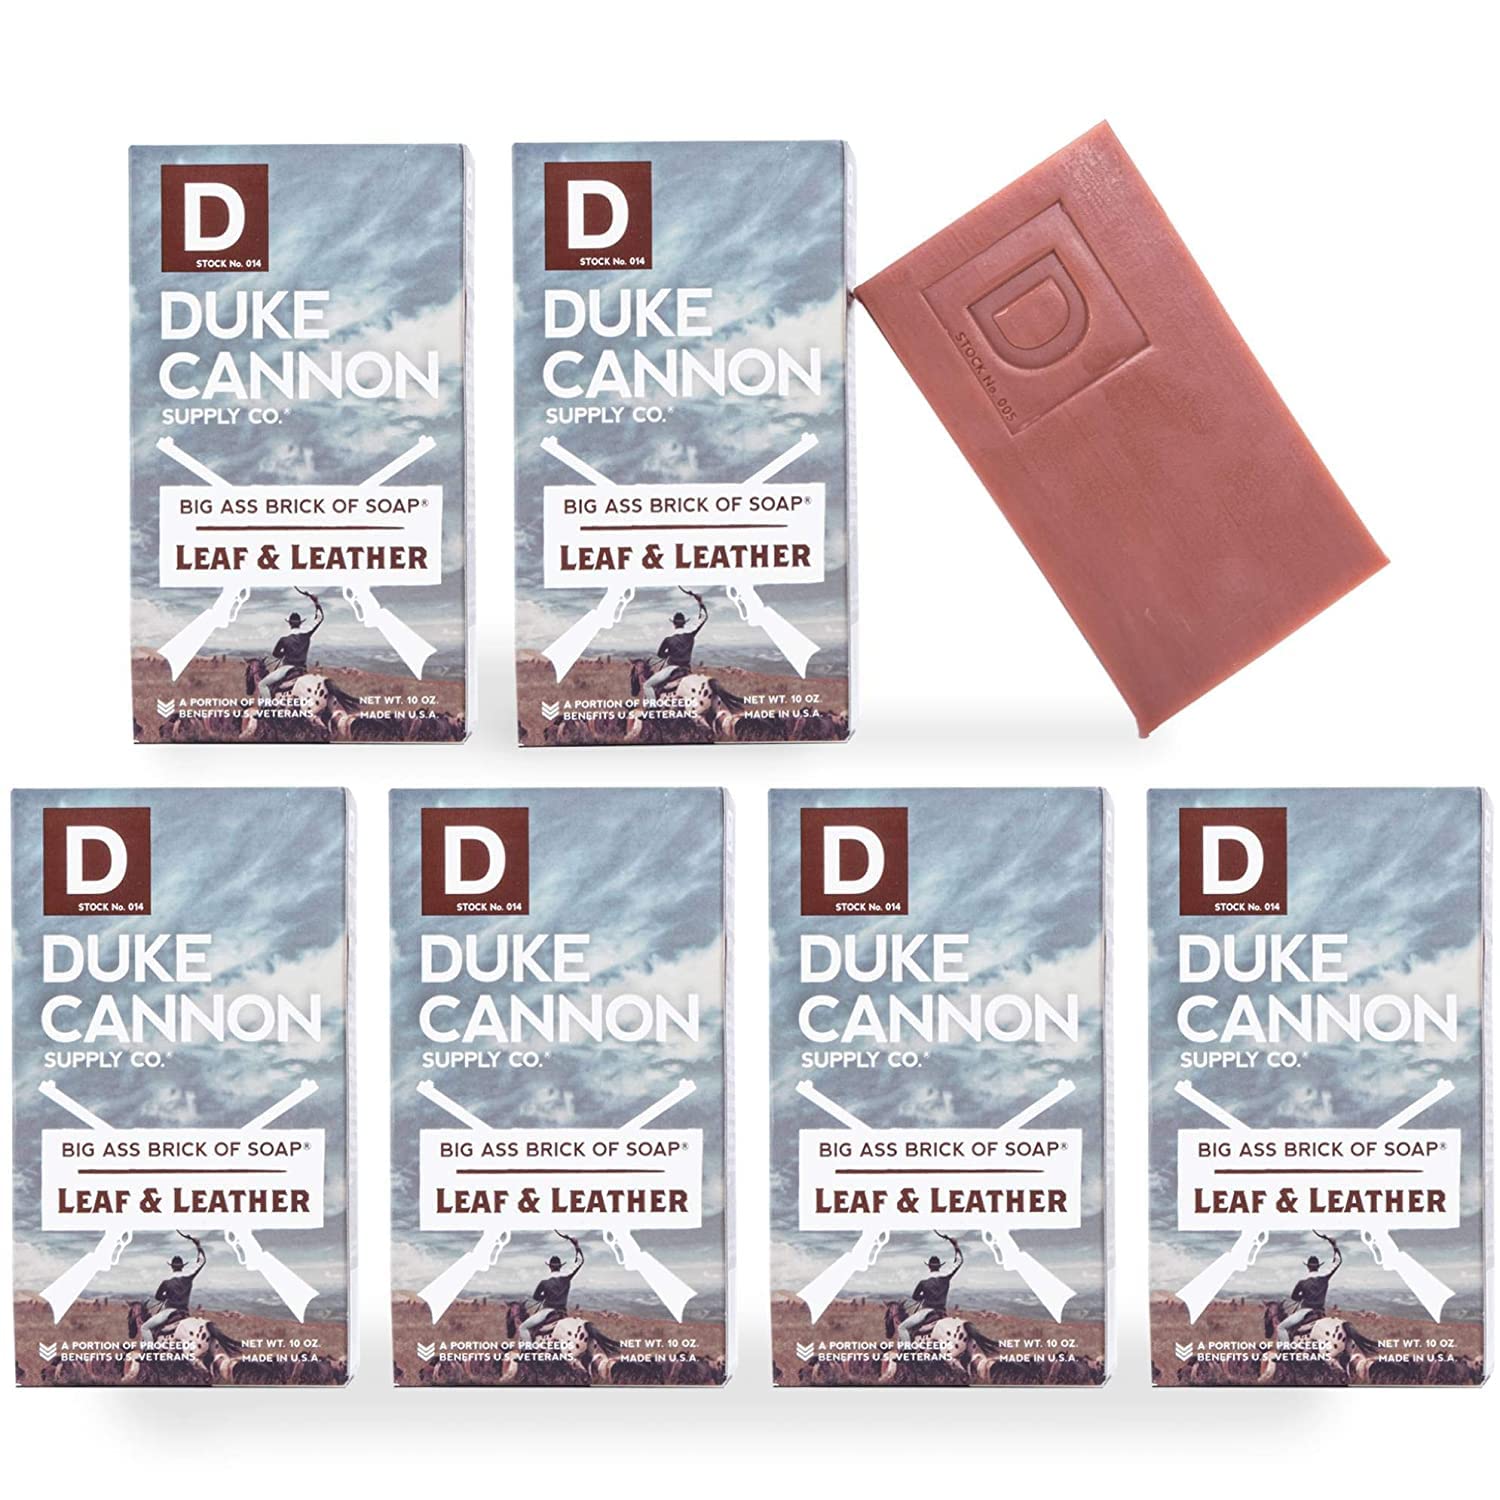 Duke Cannon Supply Co. Big Ass Brick of Soap Bar for Men Leaf + Leather (Amber & Woodsy Scent) Multi-Pack - Superior Grade, Extra Large, Masculine Scents, All Skin Types, Paraben-Free, 10  (6 Pack)